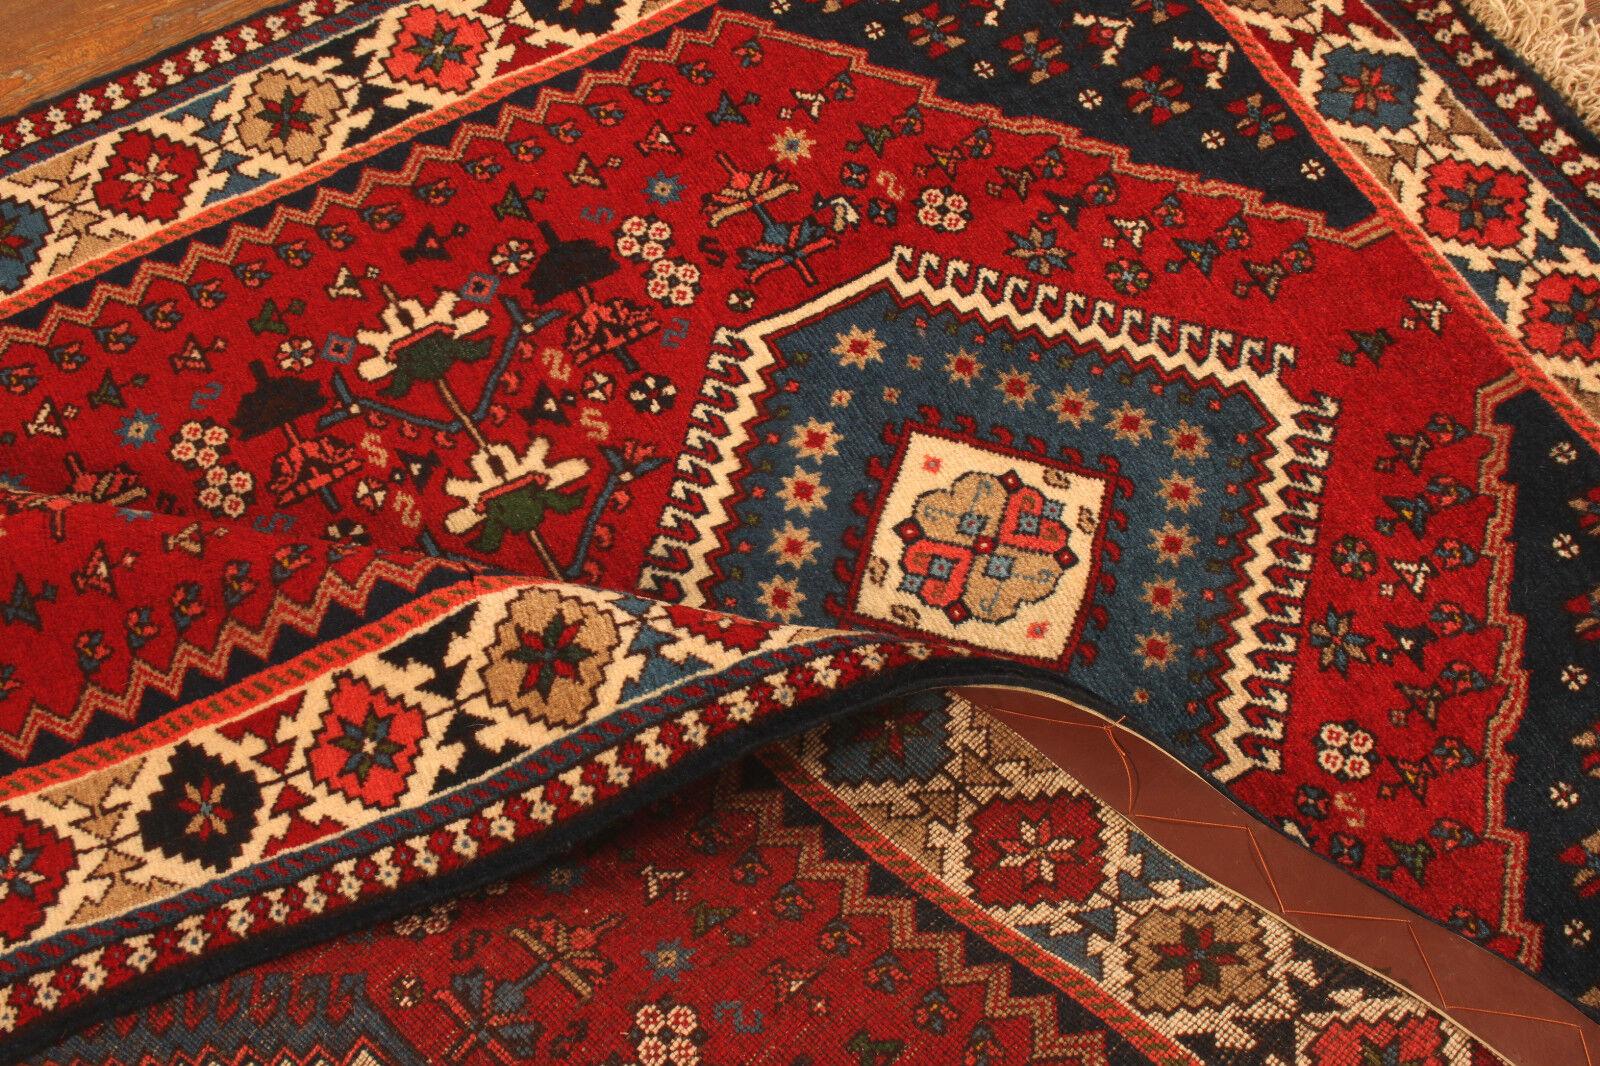 Late 20th Century Handmade Vintage Persian Style Yalameh Rug 3.4' x 5.2', 1990s - 1T22 For Sale